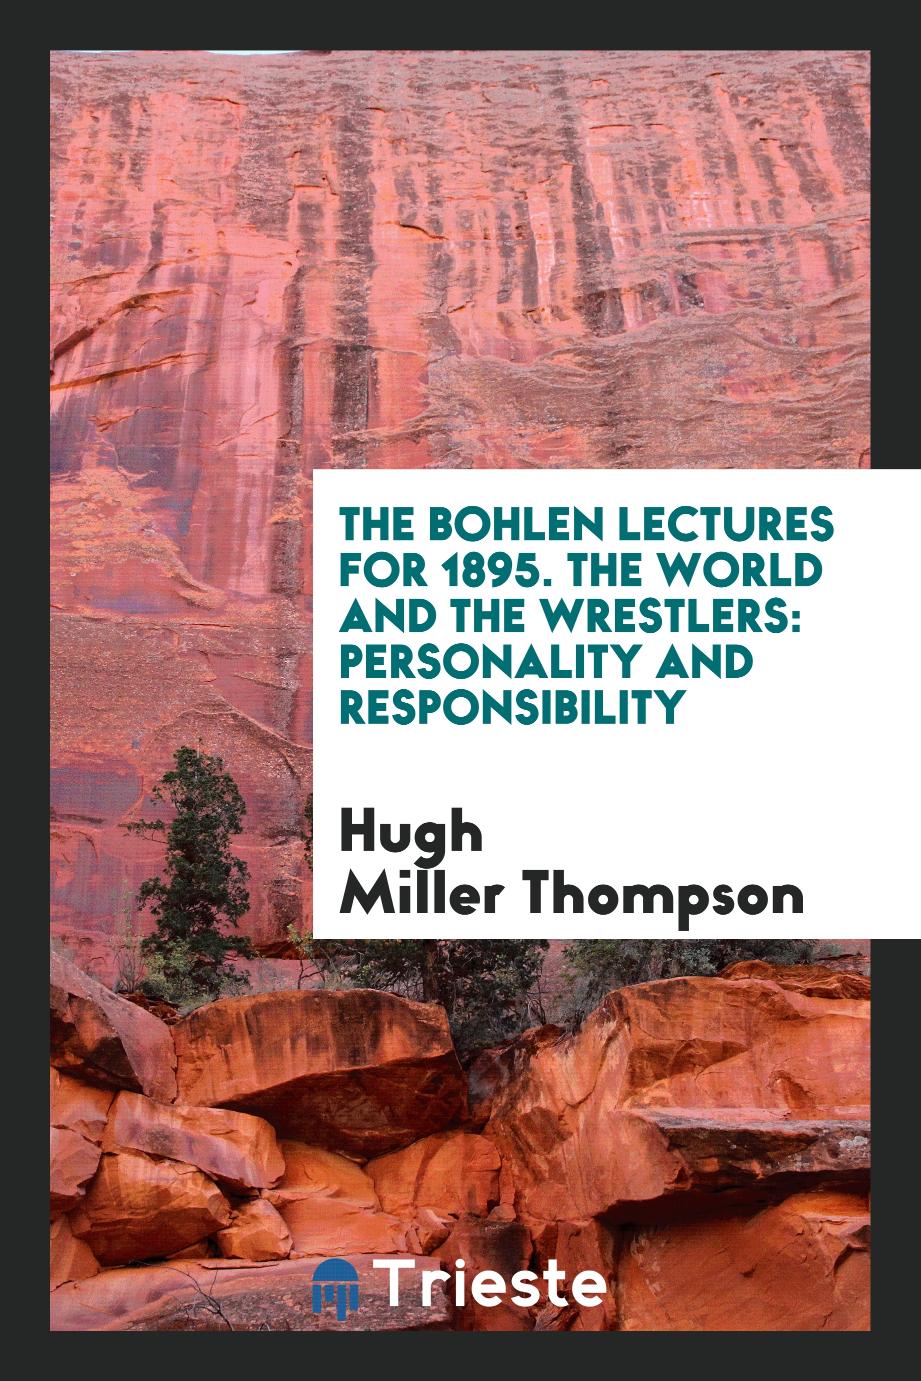 The Bohlen Lectures for 1895. The World and the Wrestlers: Personality and Responsibility